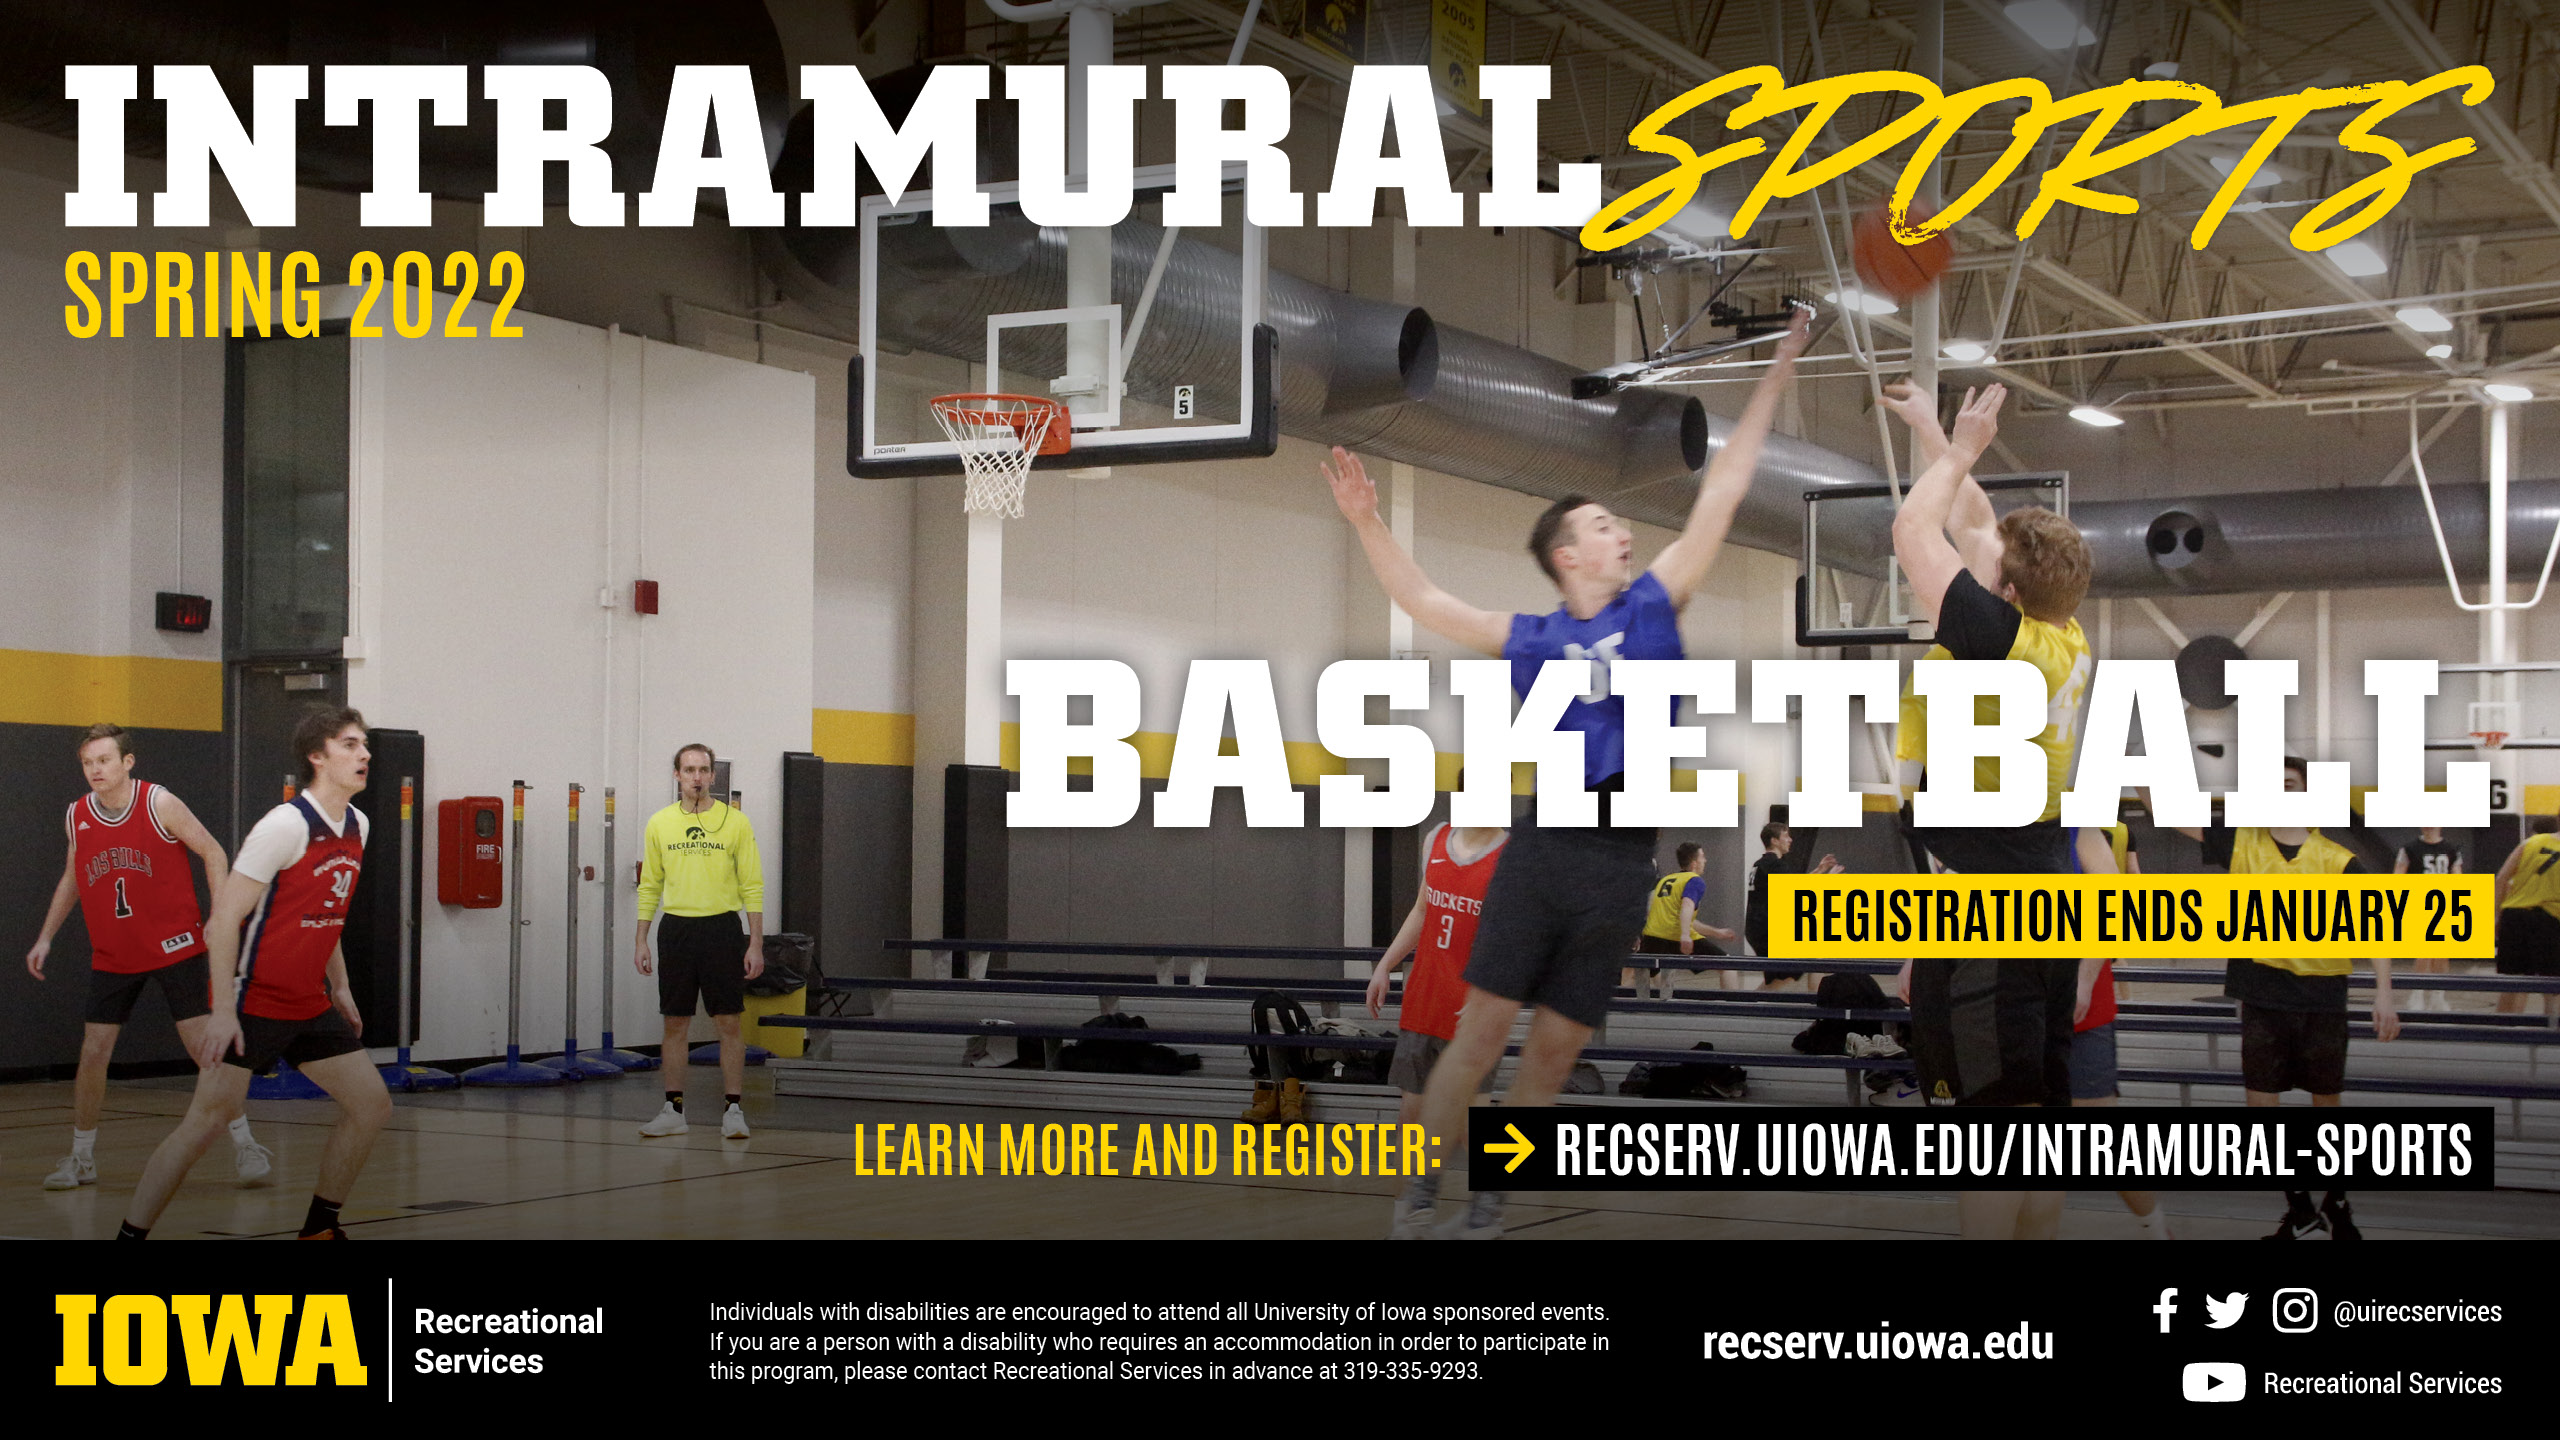 Intramural Sports Spring 2022 Basketball Registration ends January 25 learn more and register at: recserv.uiowa.edu/intramural-sports